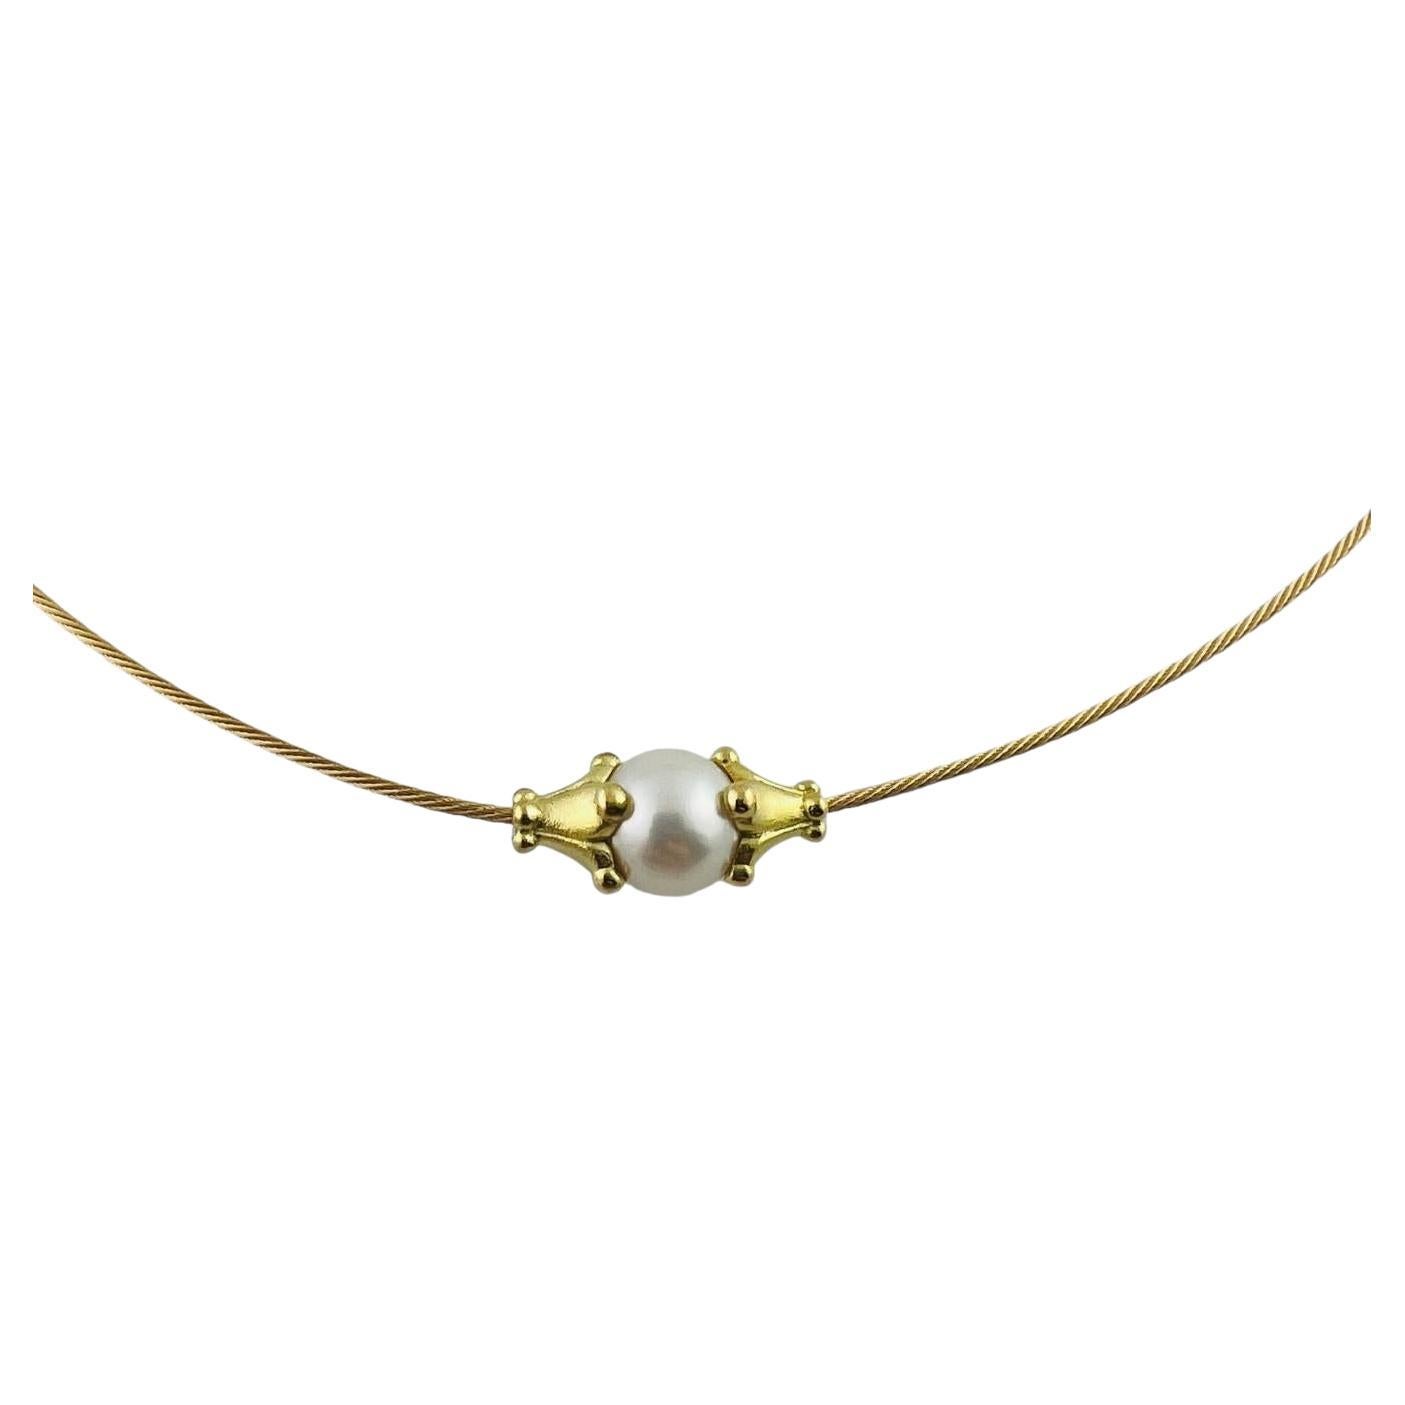 Paul Morelli 18 Karat Yellow Gold and Pearl Necklace #16748 For Sale